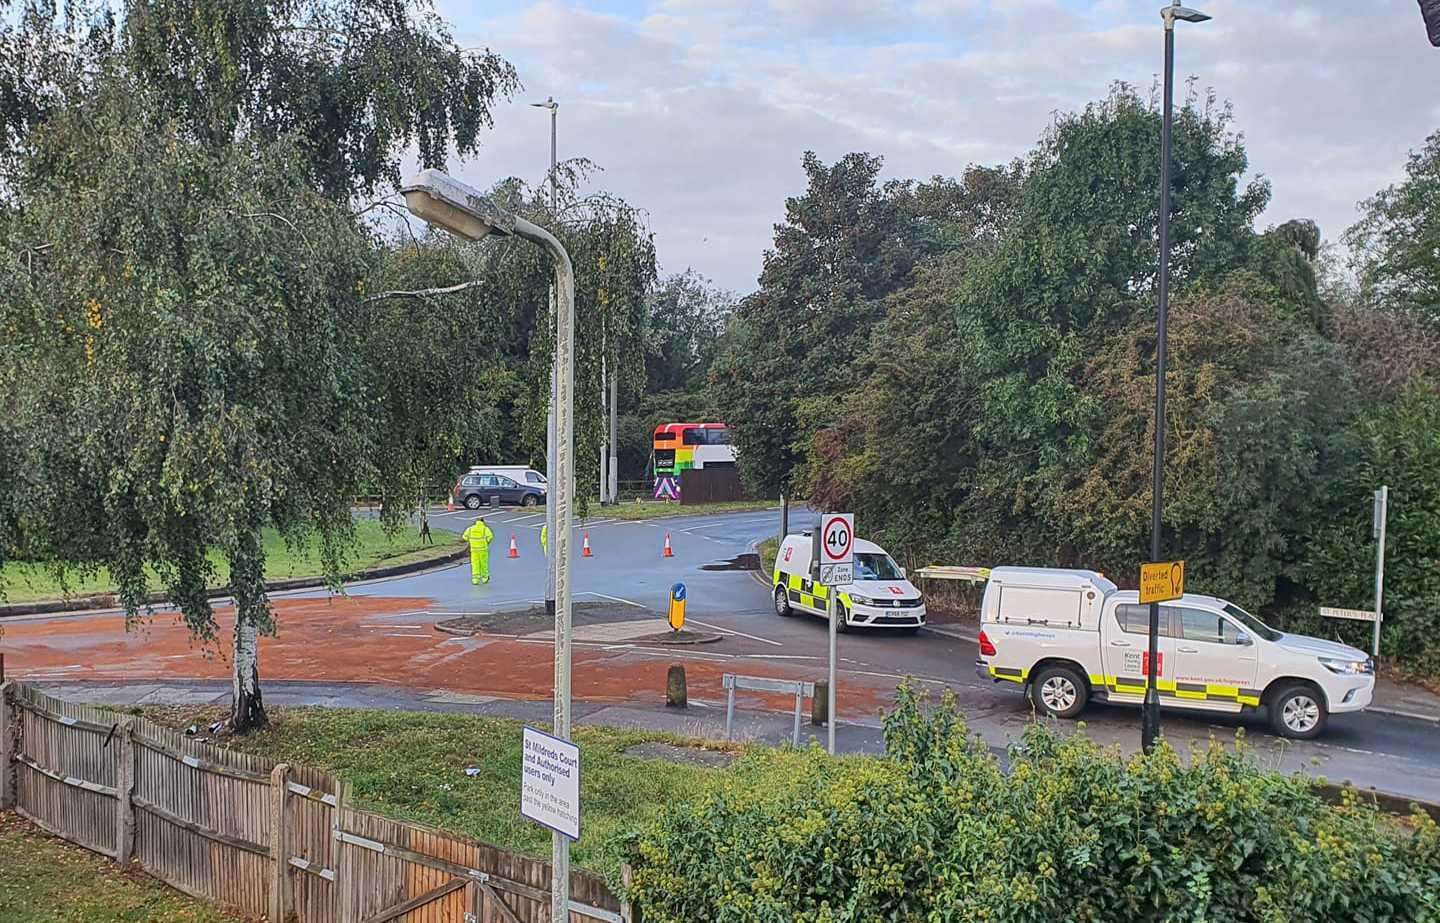 The scene of the crash and oil spillage in Canterbury. Picture: James Swadling